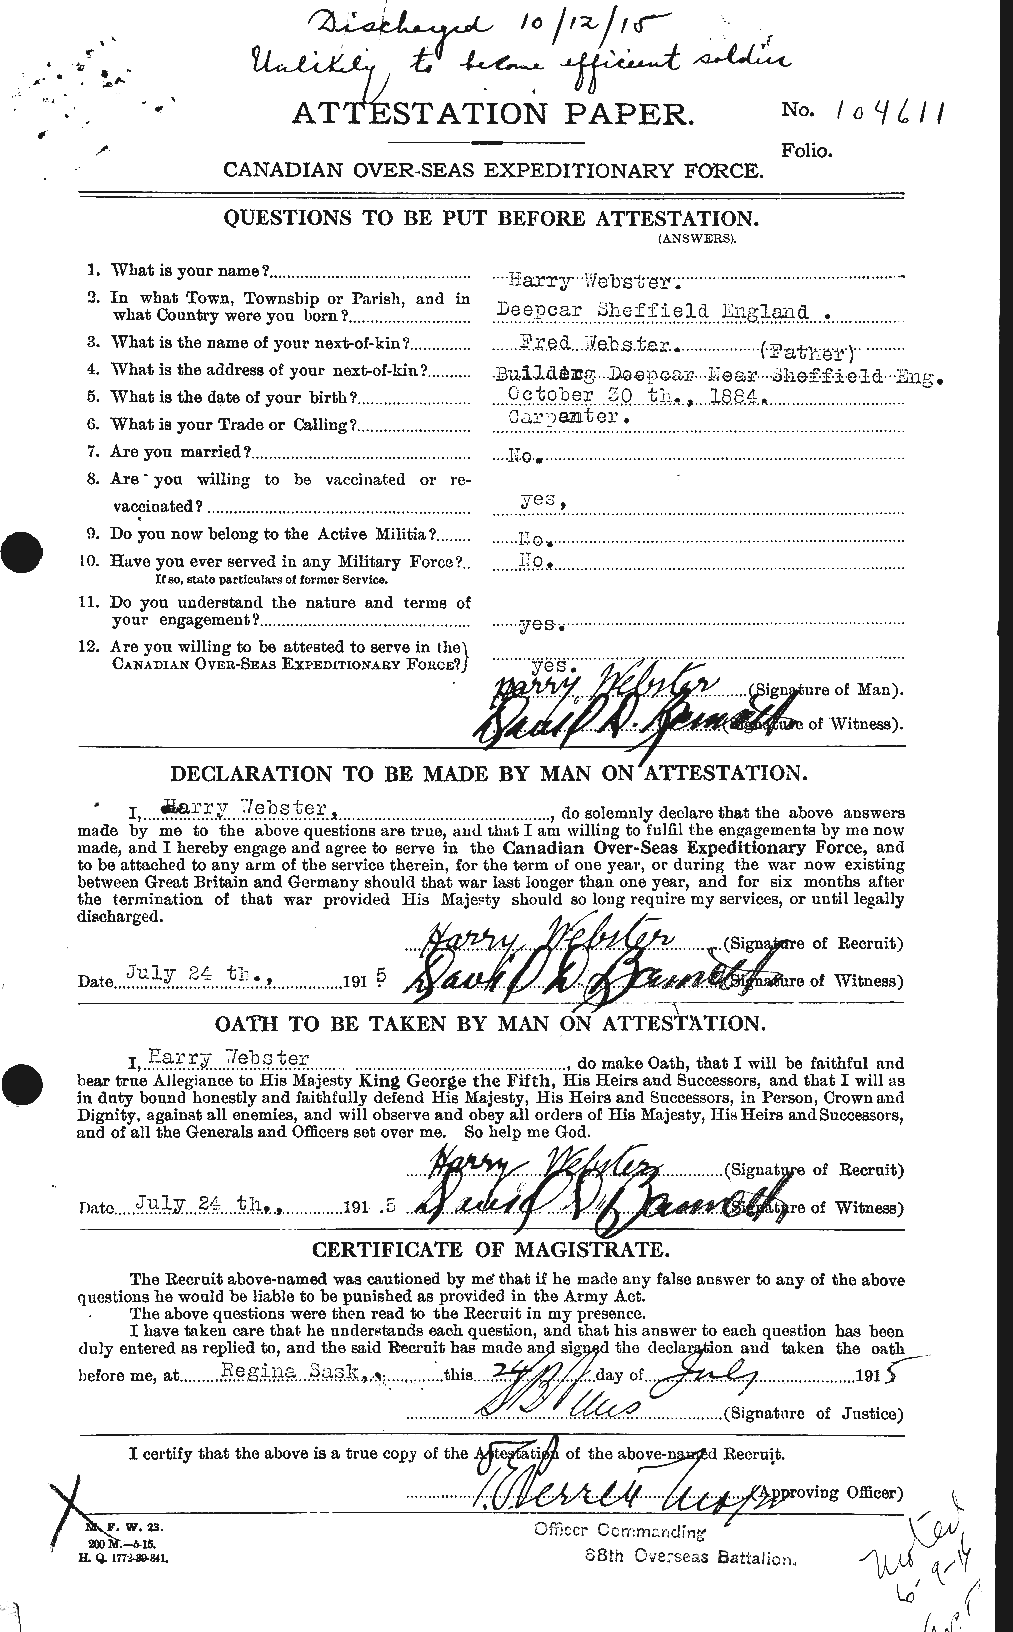 Personnel Records of the First World War - CEF 670409a